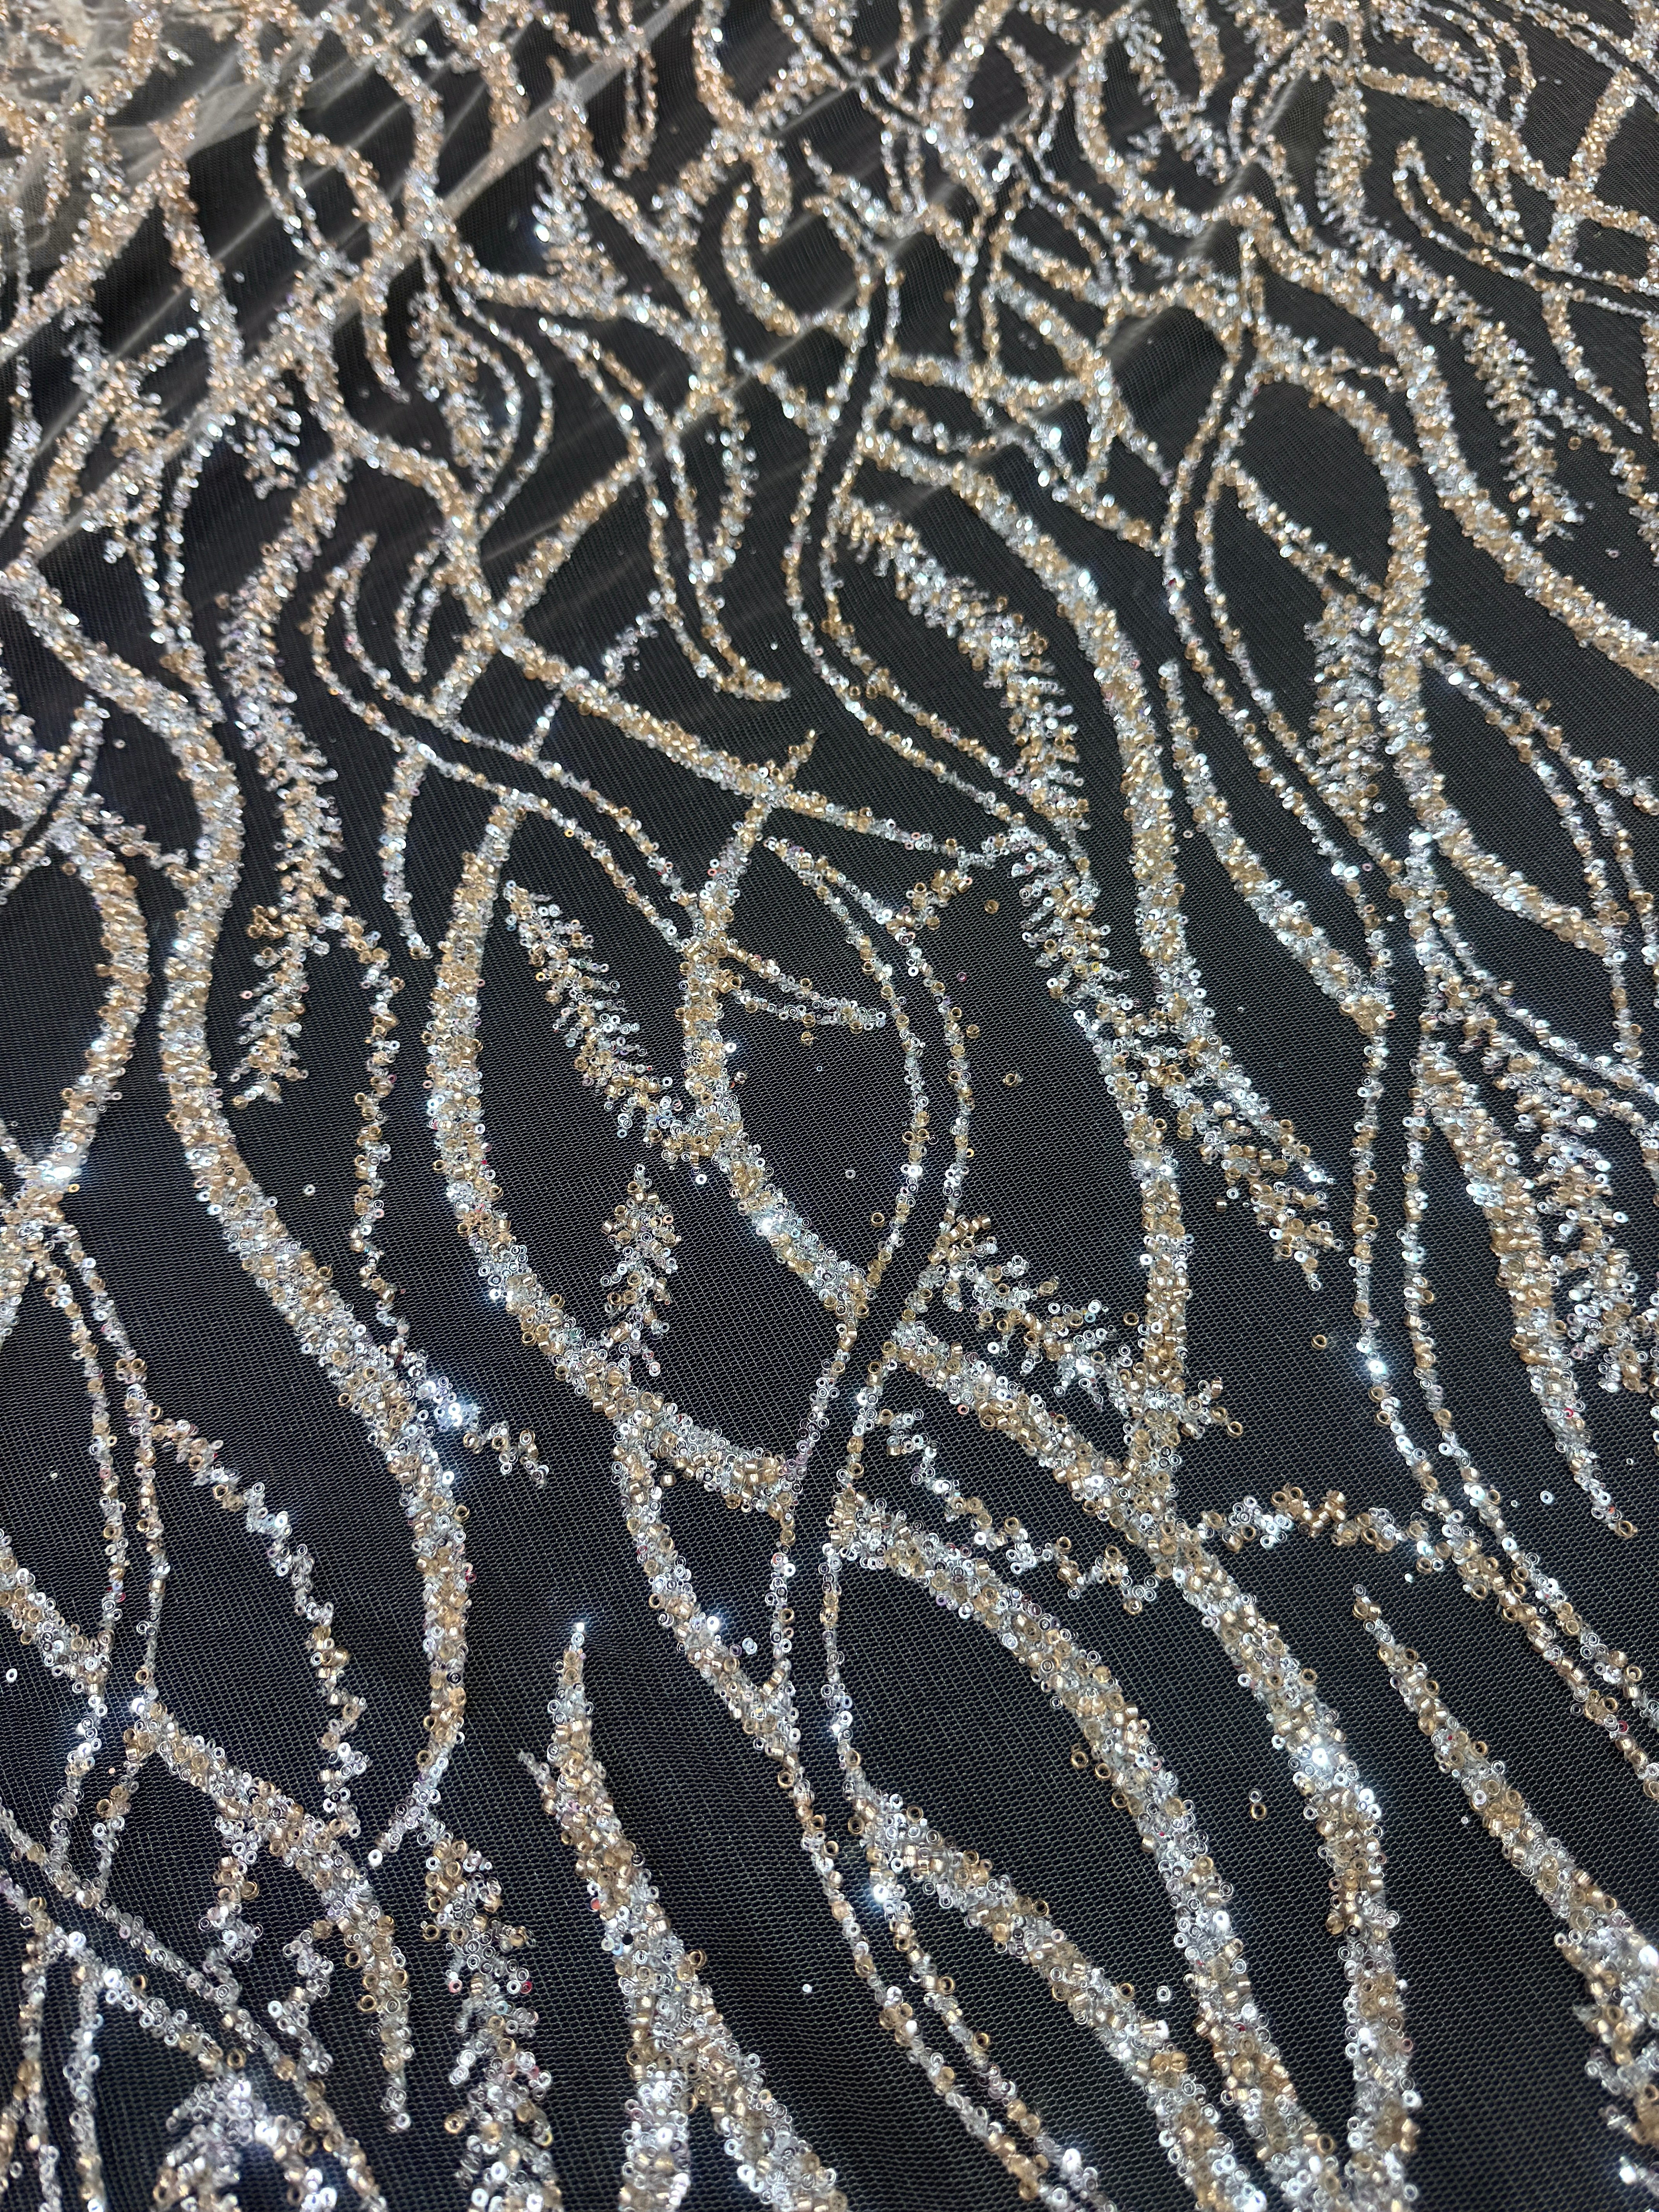 Gold Silver Wave Design Glitter Lace Mesh, online textile store, sewing, fabric store, sewing store, cheap fabric store, kiki textiles